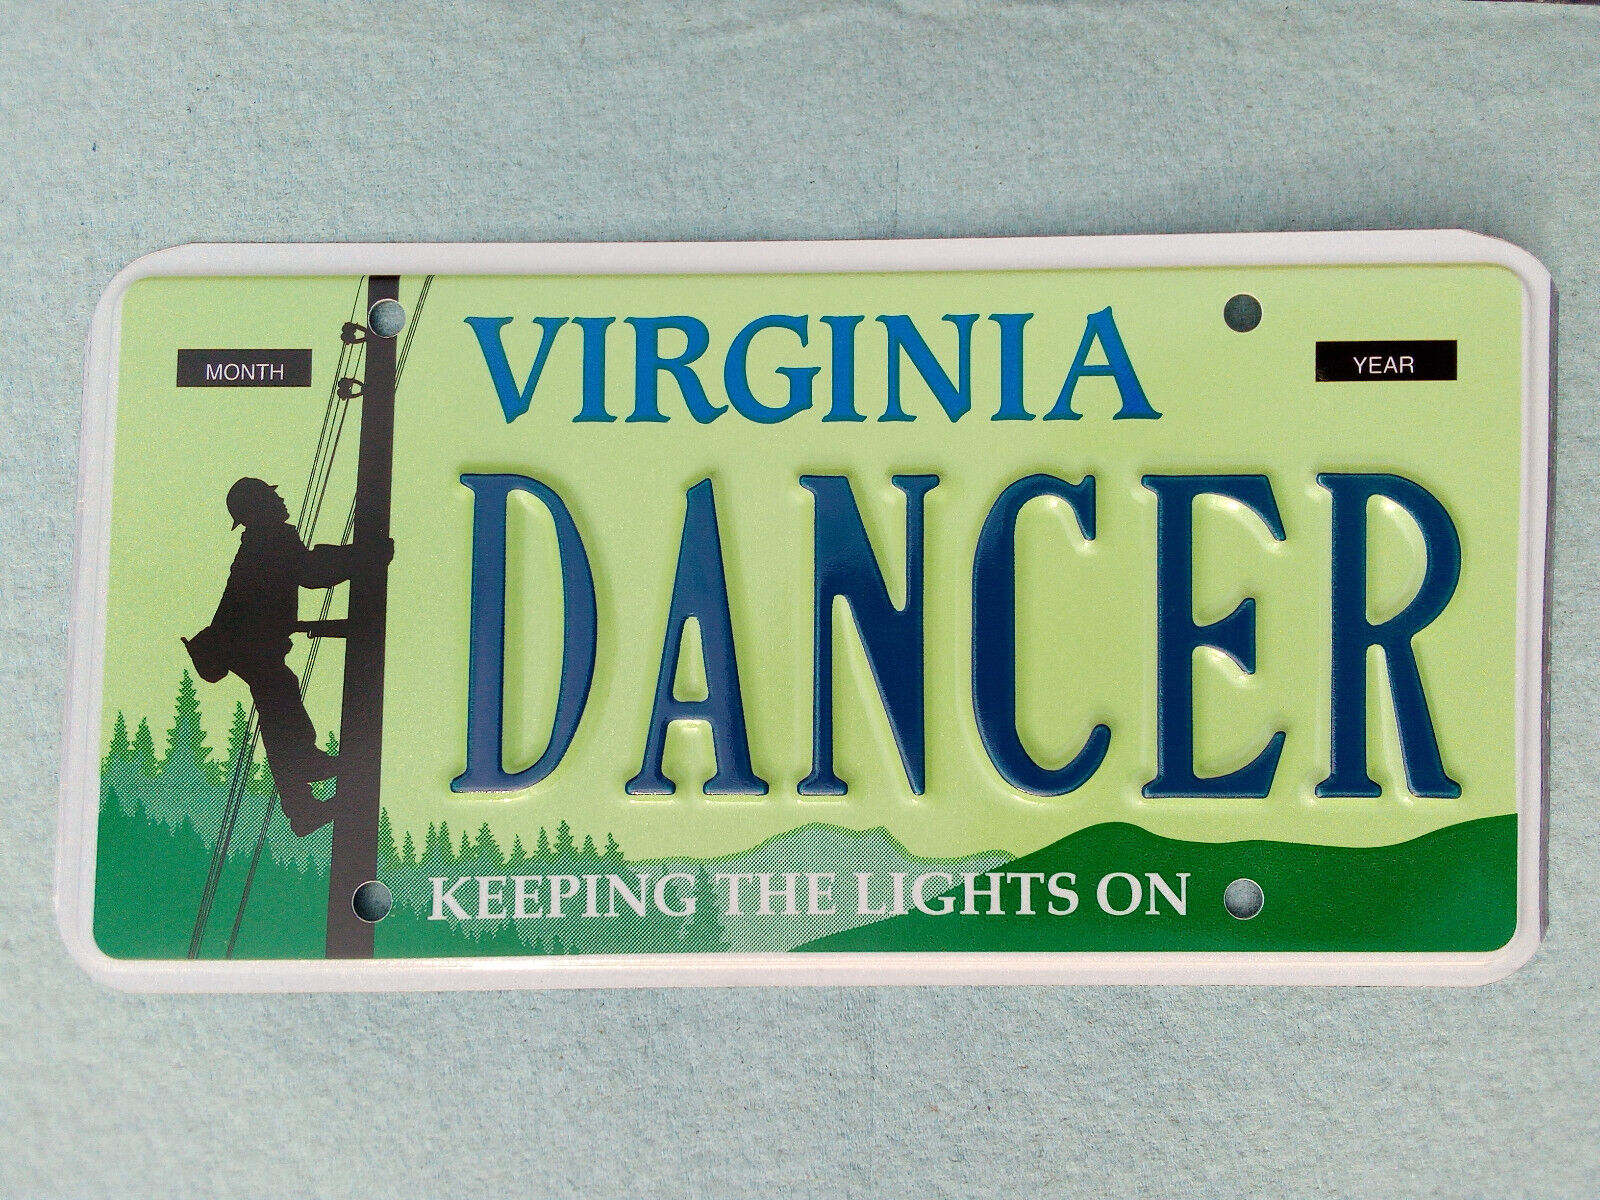 Expired Virginia Va DMV Issued Pole Dancer Keeping The Lights On License Plate